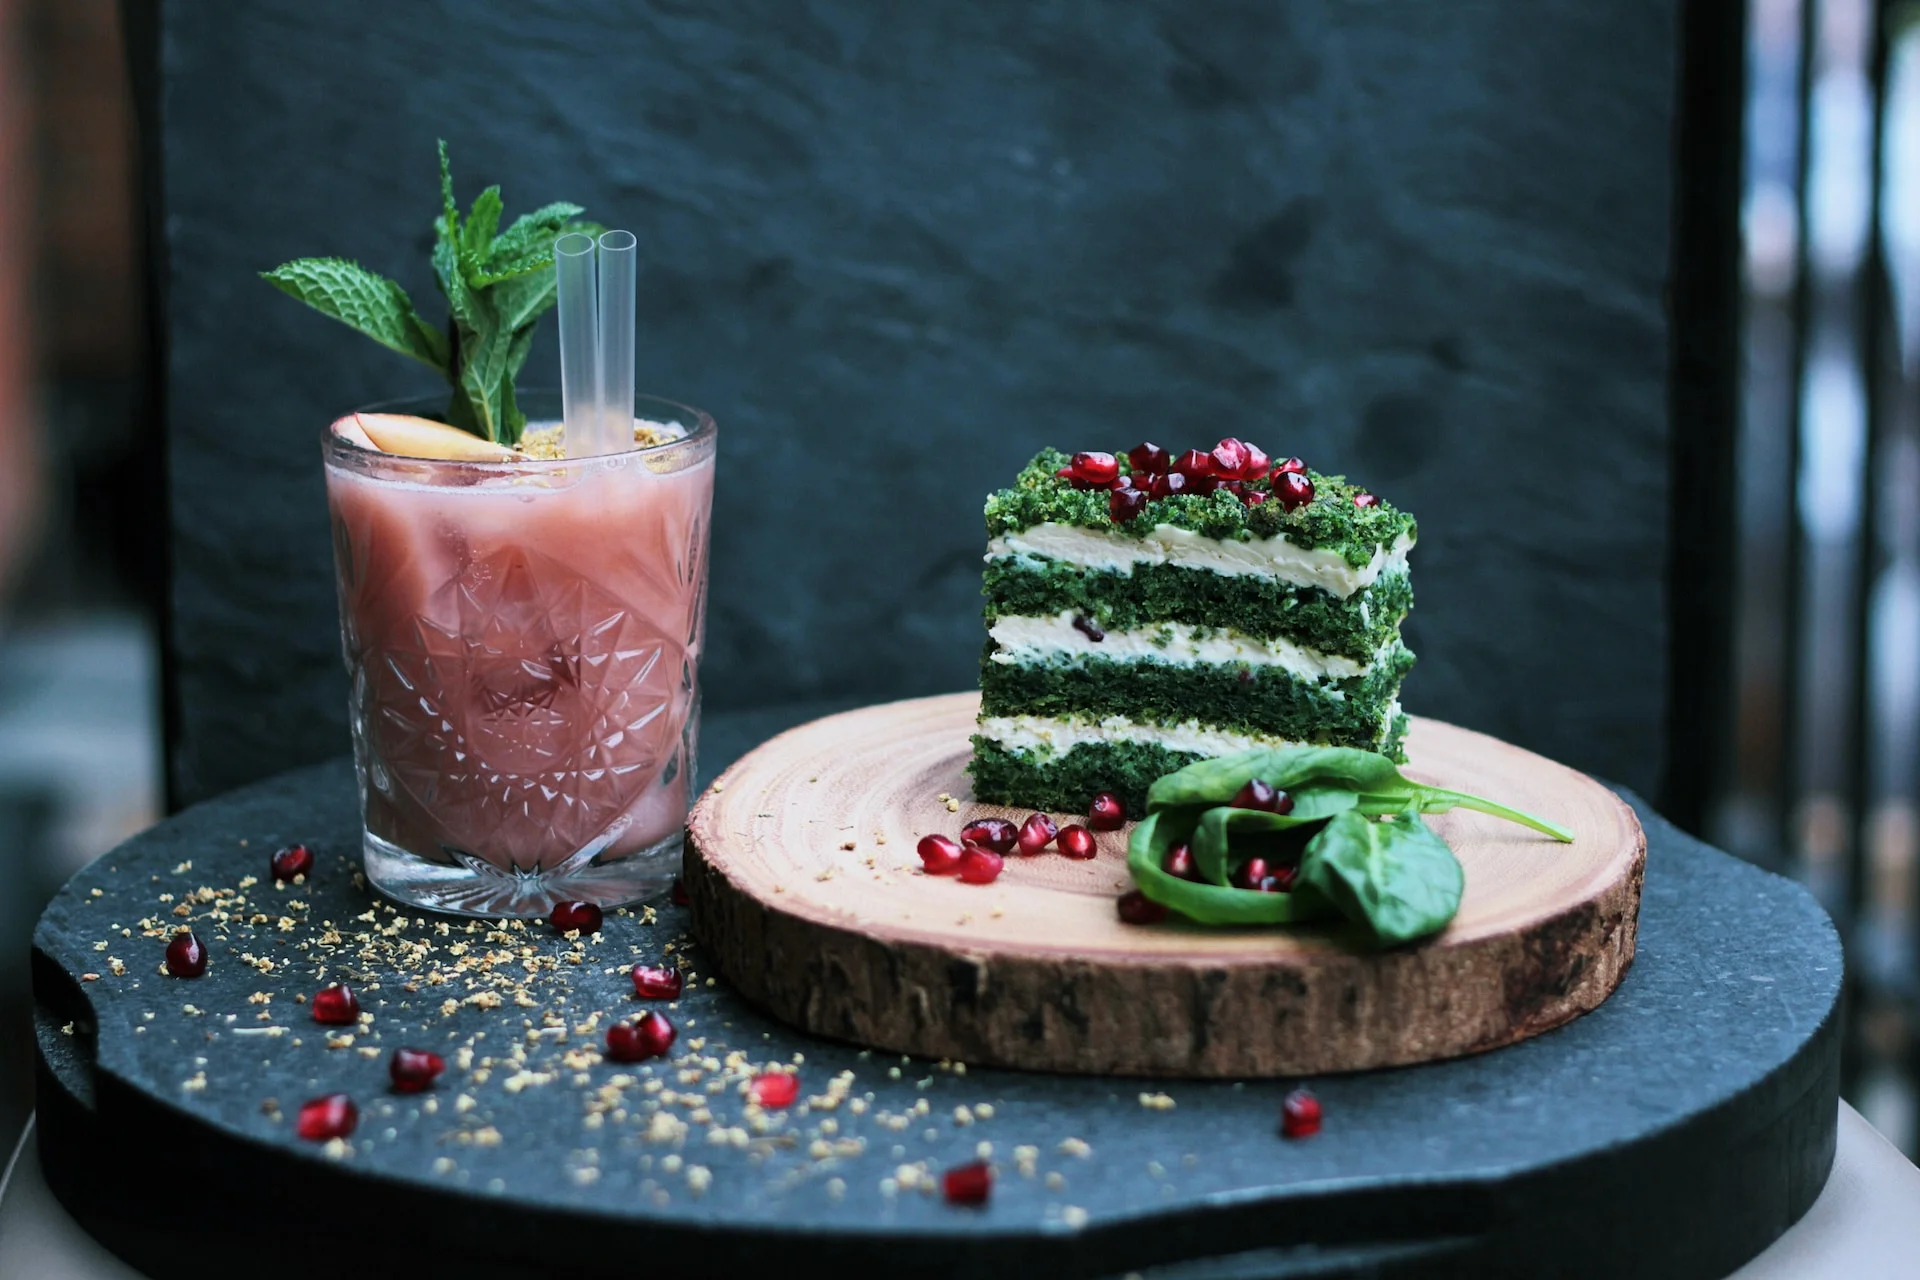 Beetroot juice with Spinach cake